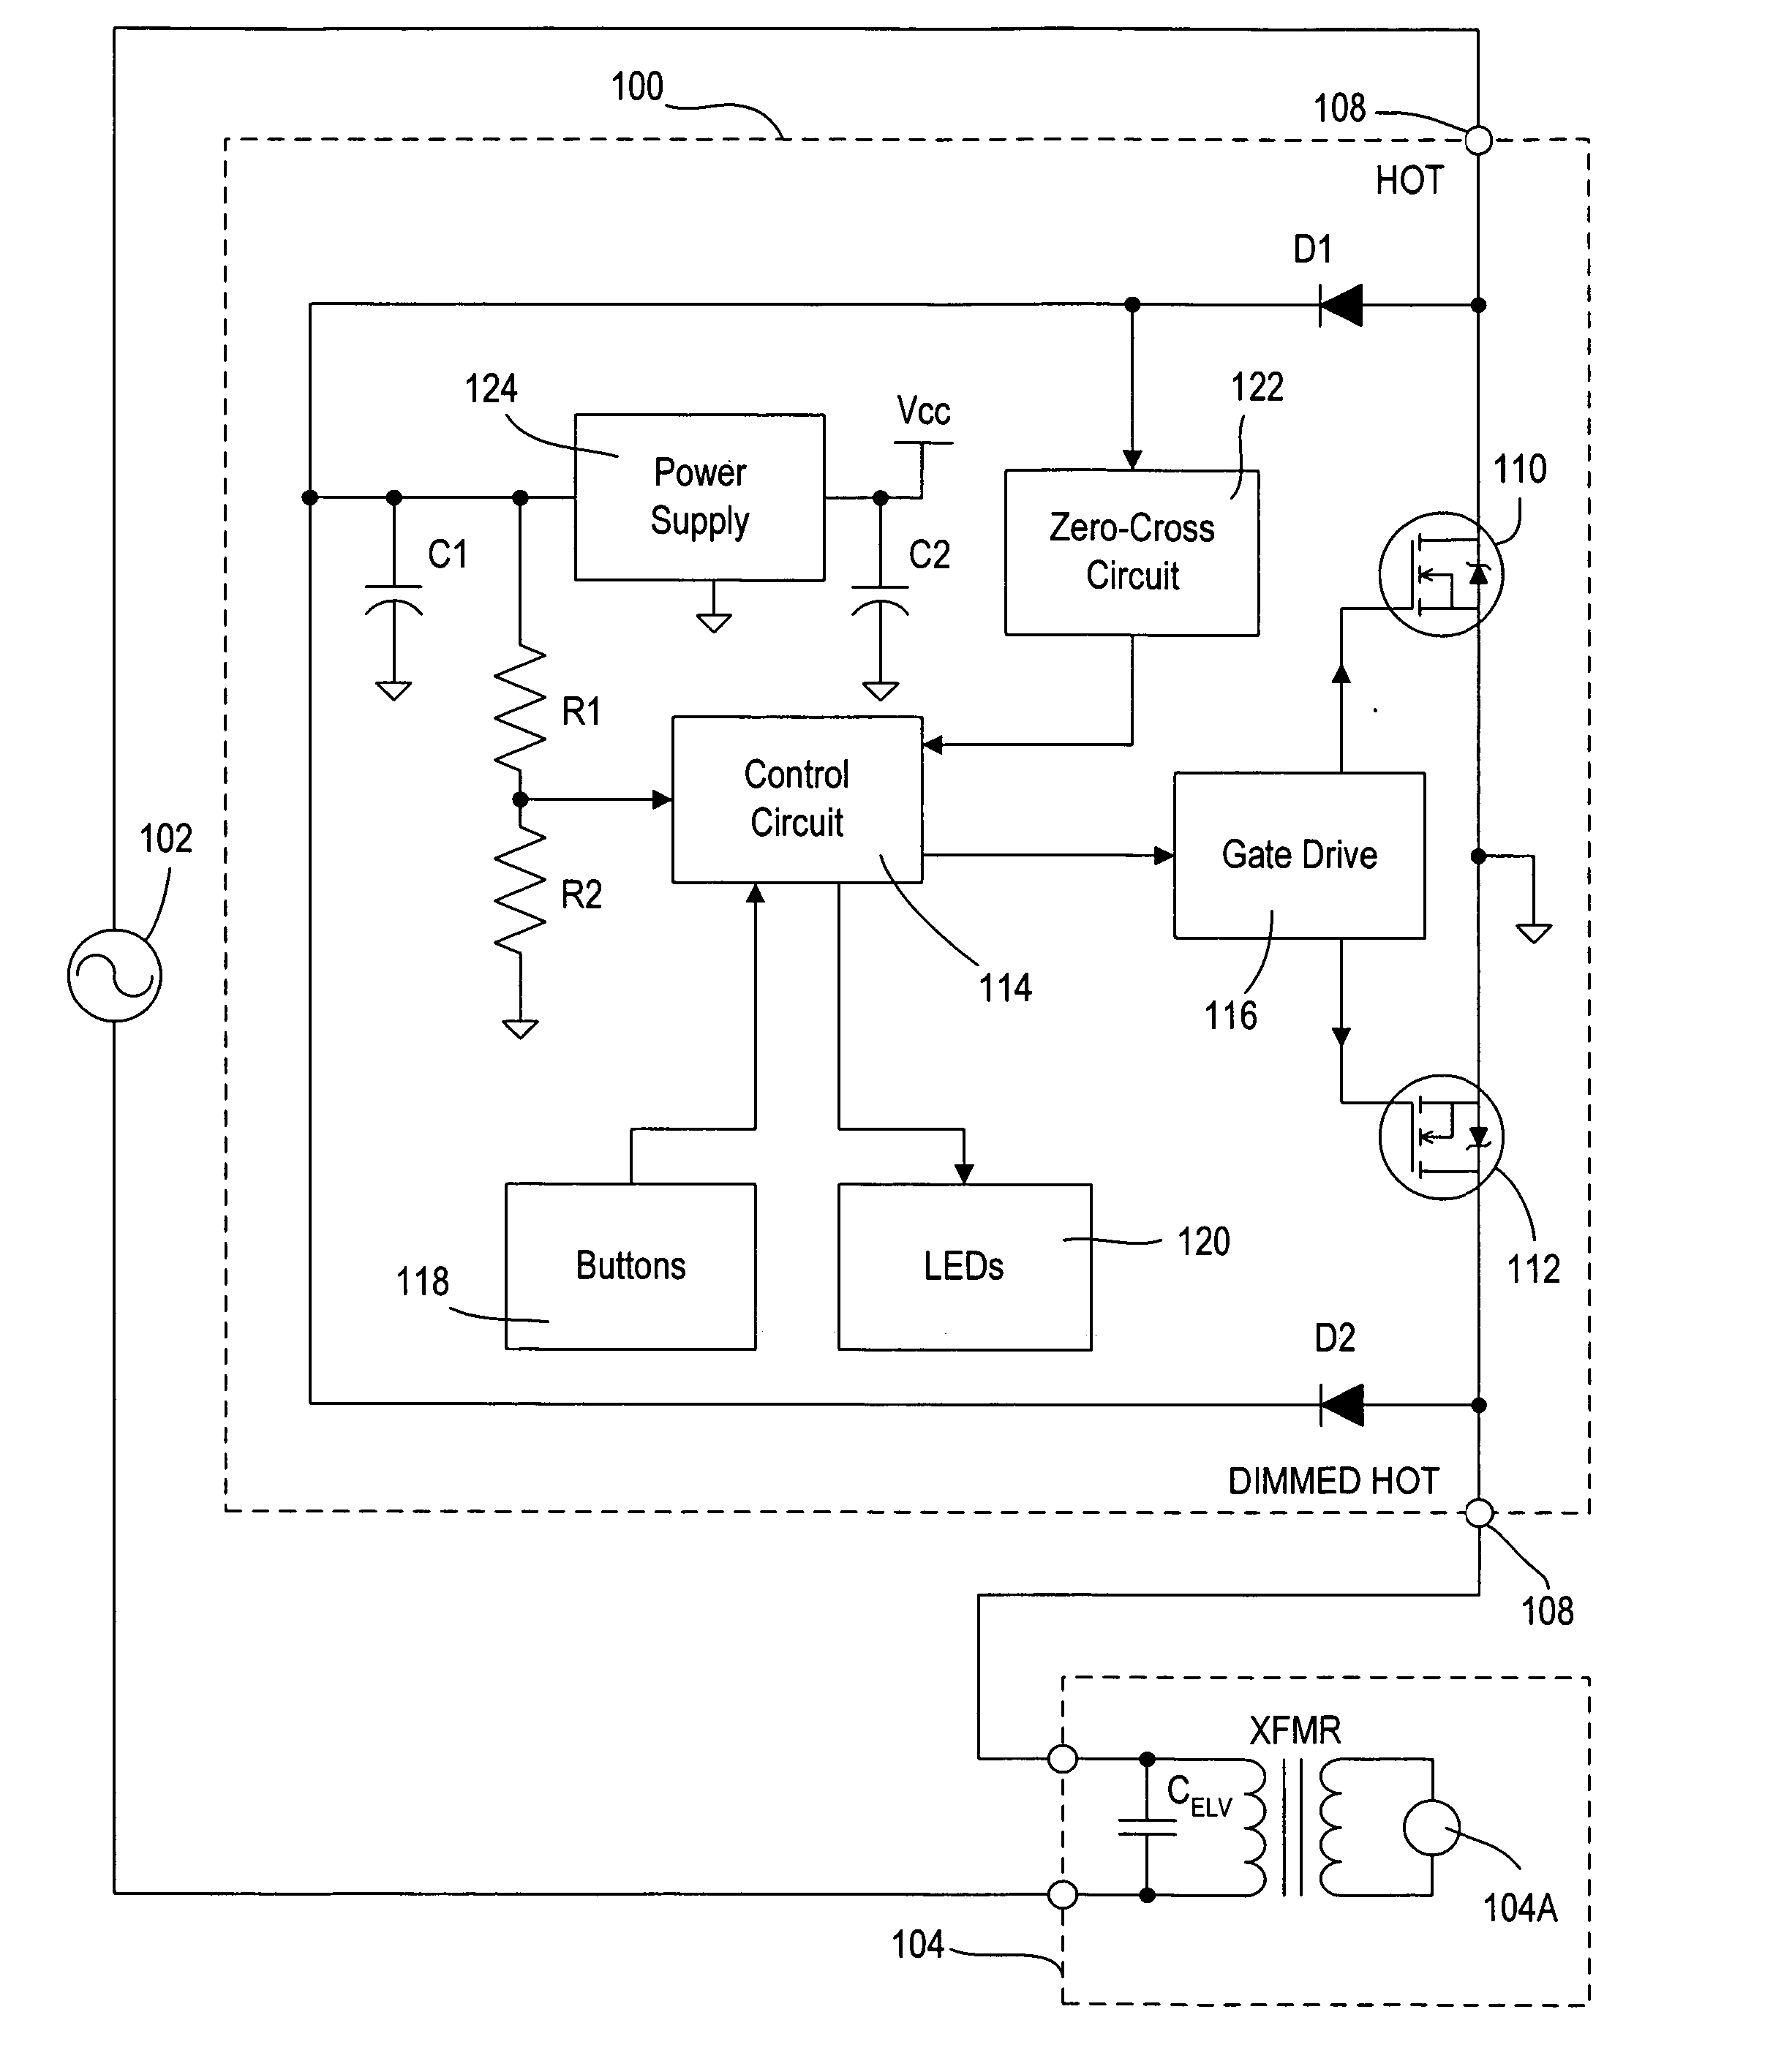 Dimmer having a power supply monitoring circuit